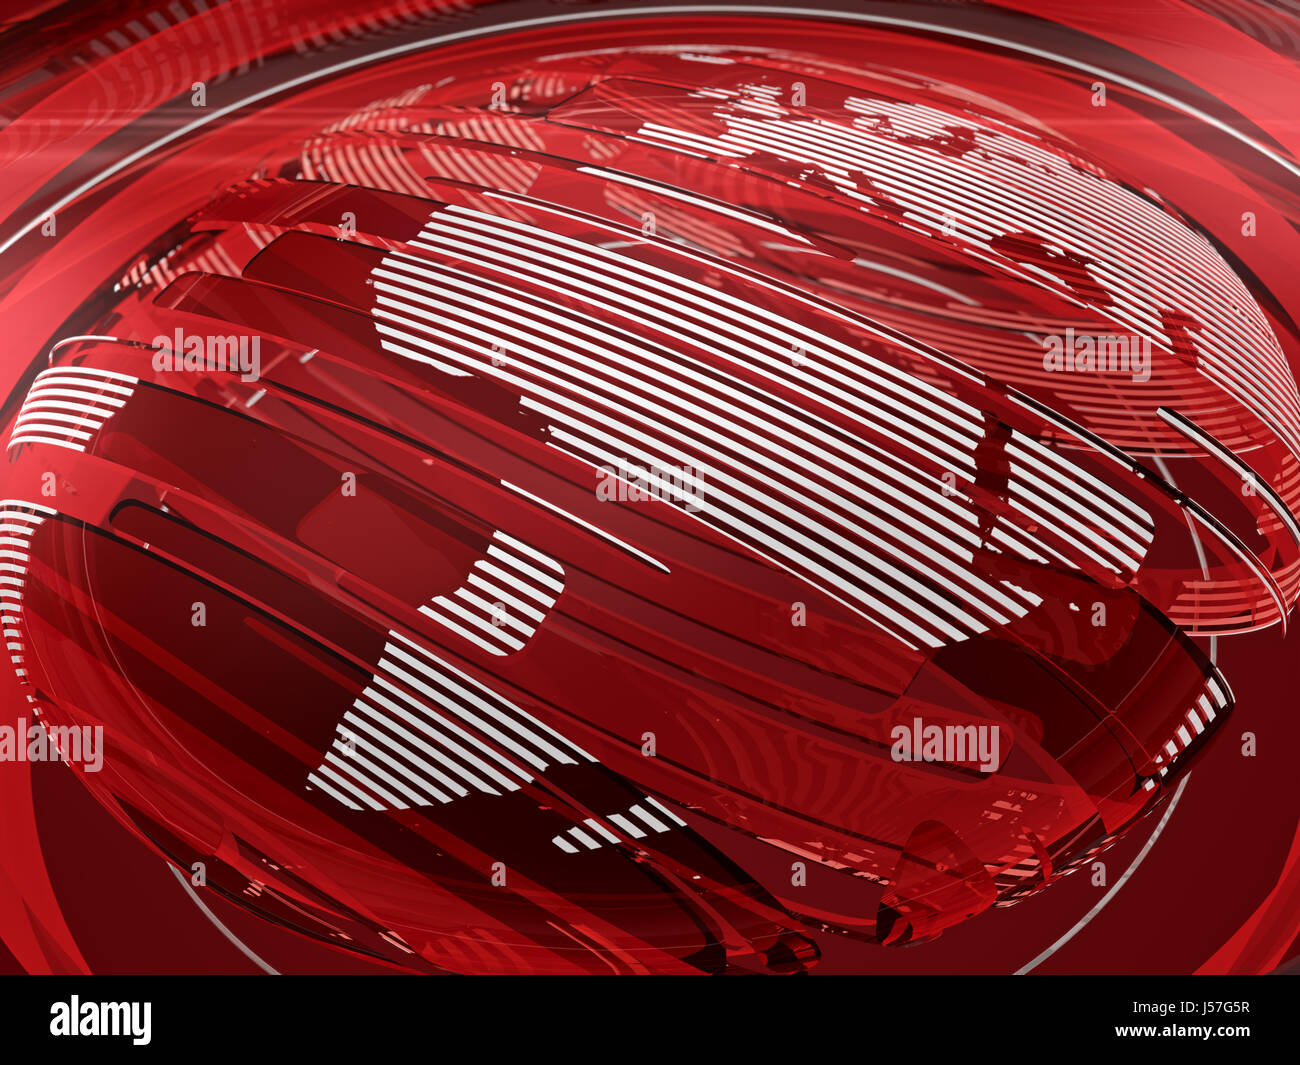 Red Glossy Globe and World Map with White Stripe Pattern Stock Photo